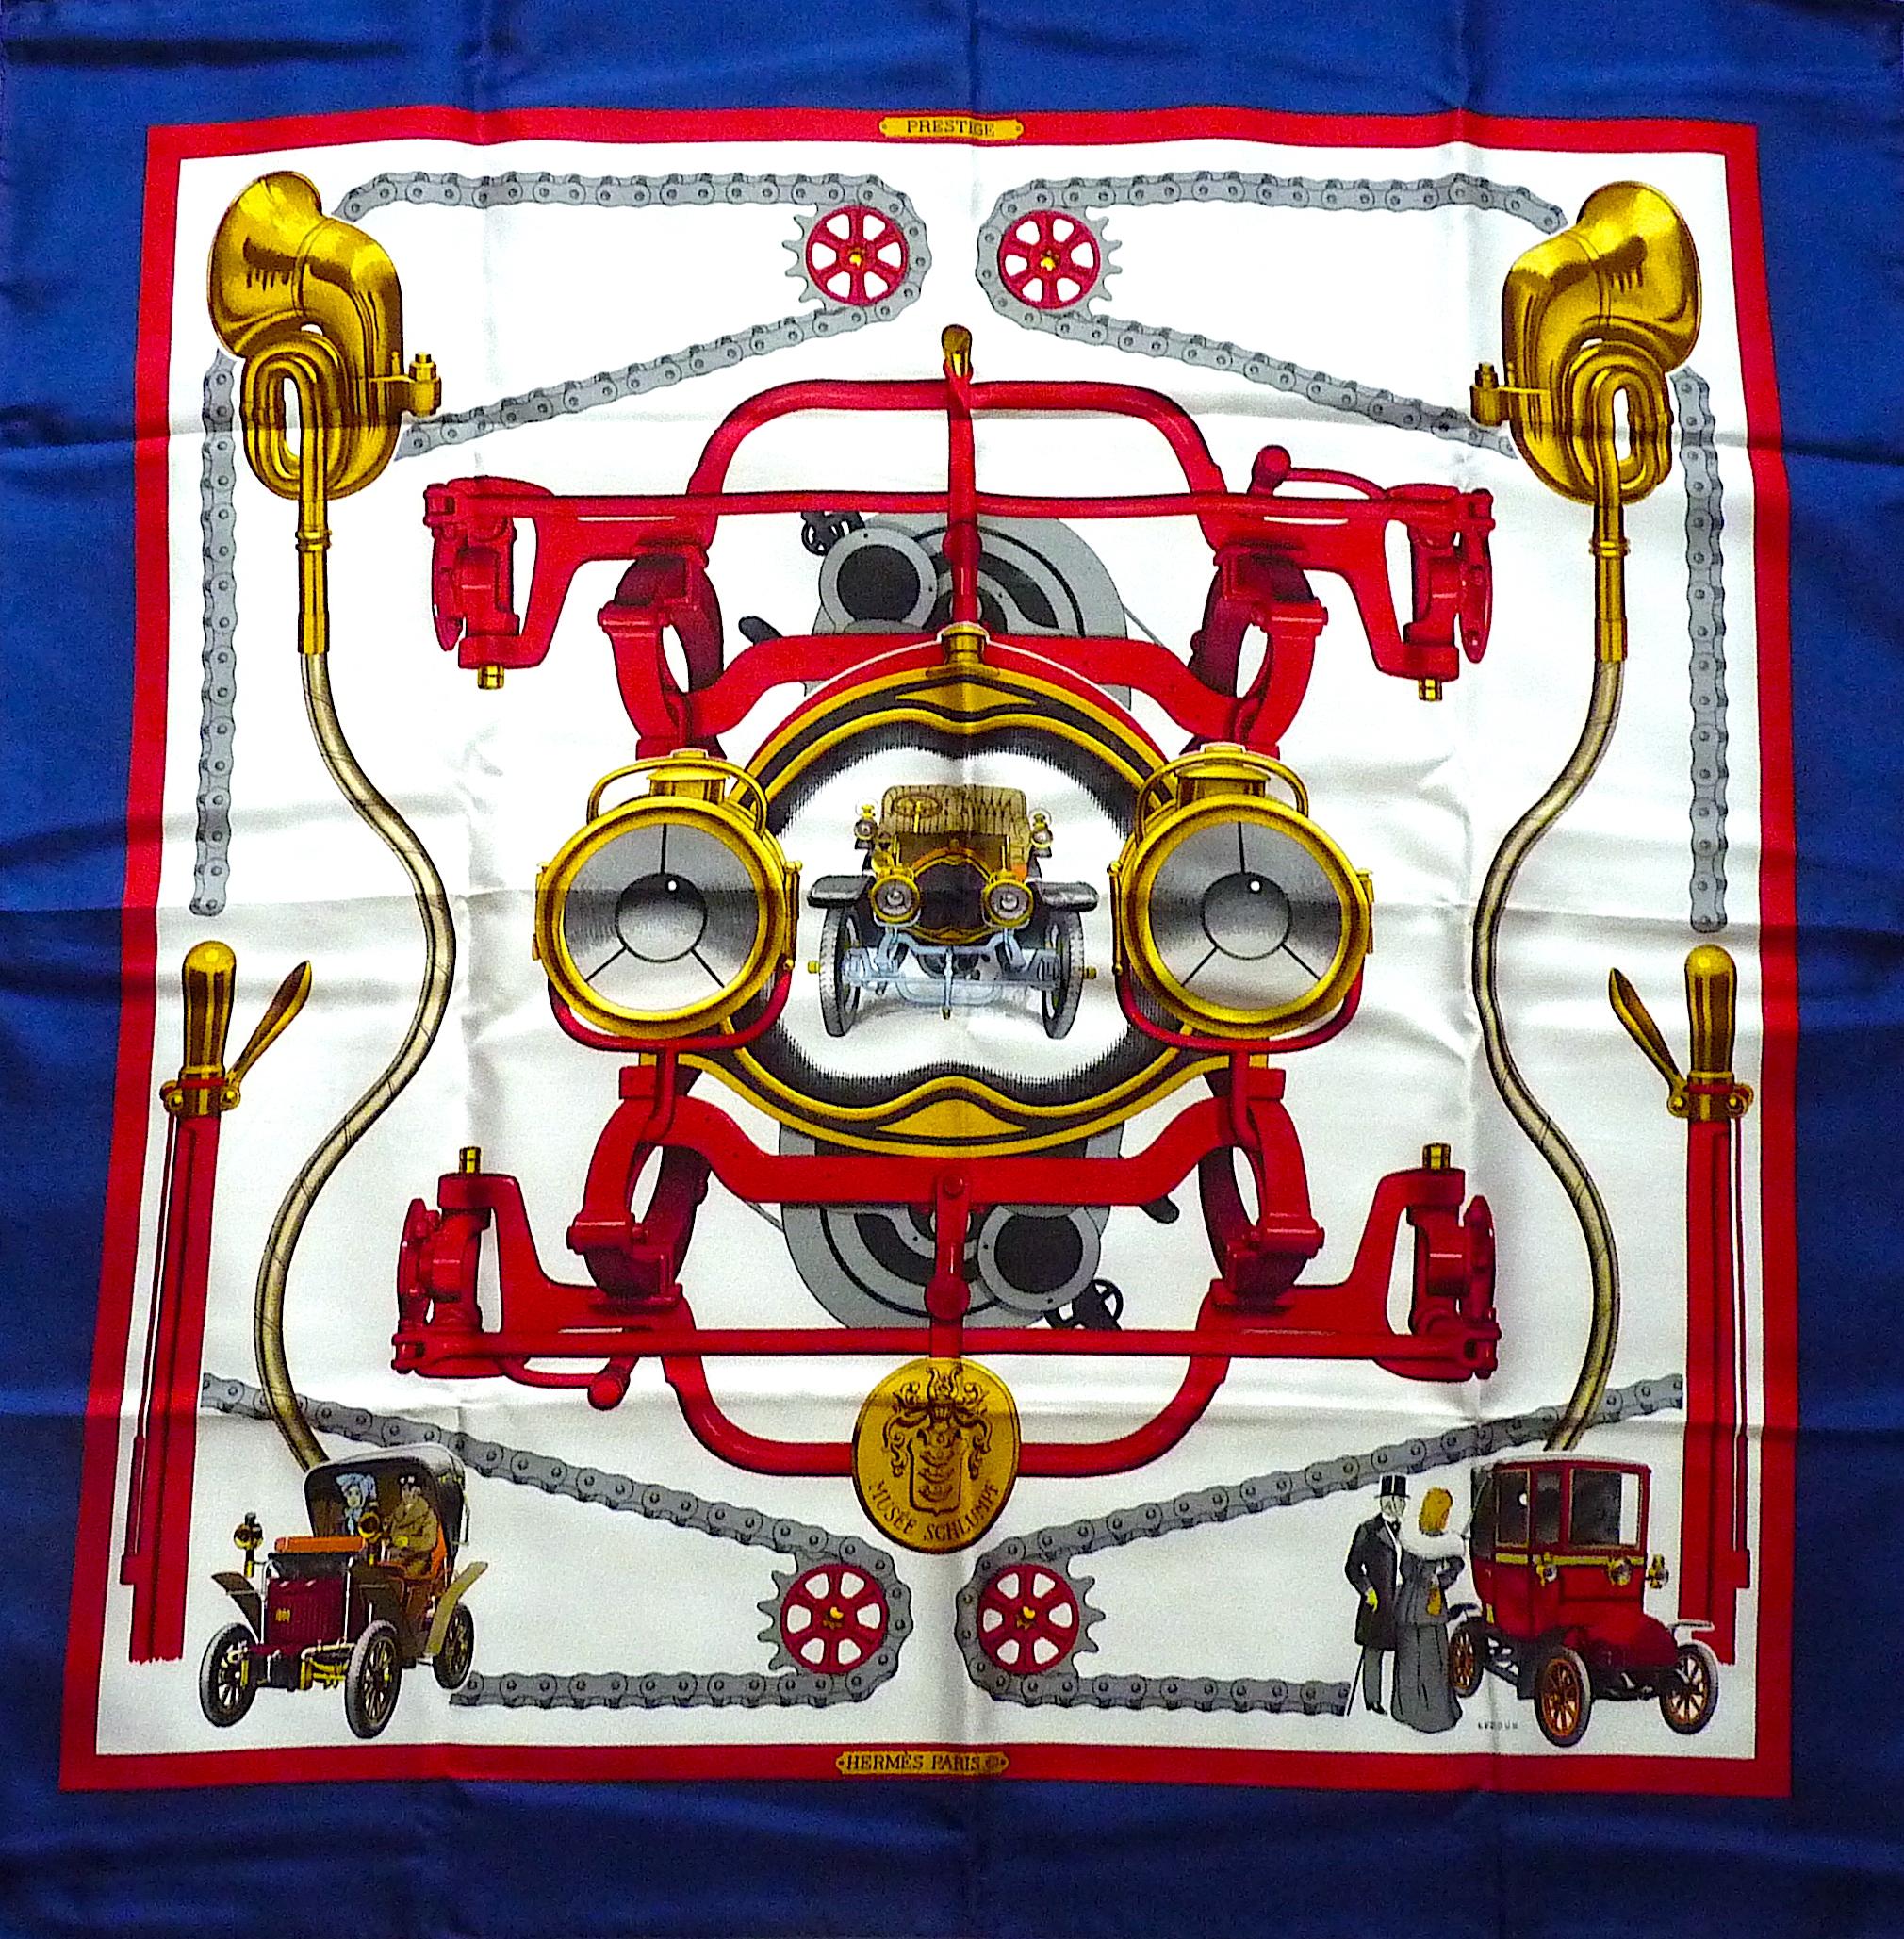 HERMES Silk Scarf Teuf Teuf, Special Edition for Musée Schlumpf in 1971, by Ledoux

This ultra rare scarf is in excellent condition

Will come with its orignal box 

Cream White Background, Blue Margin

CONDITION : Scarf in Excellent Condition,